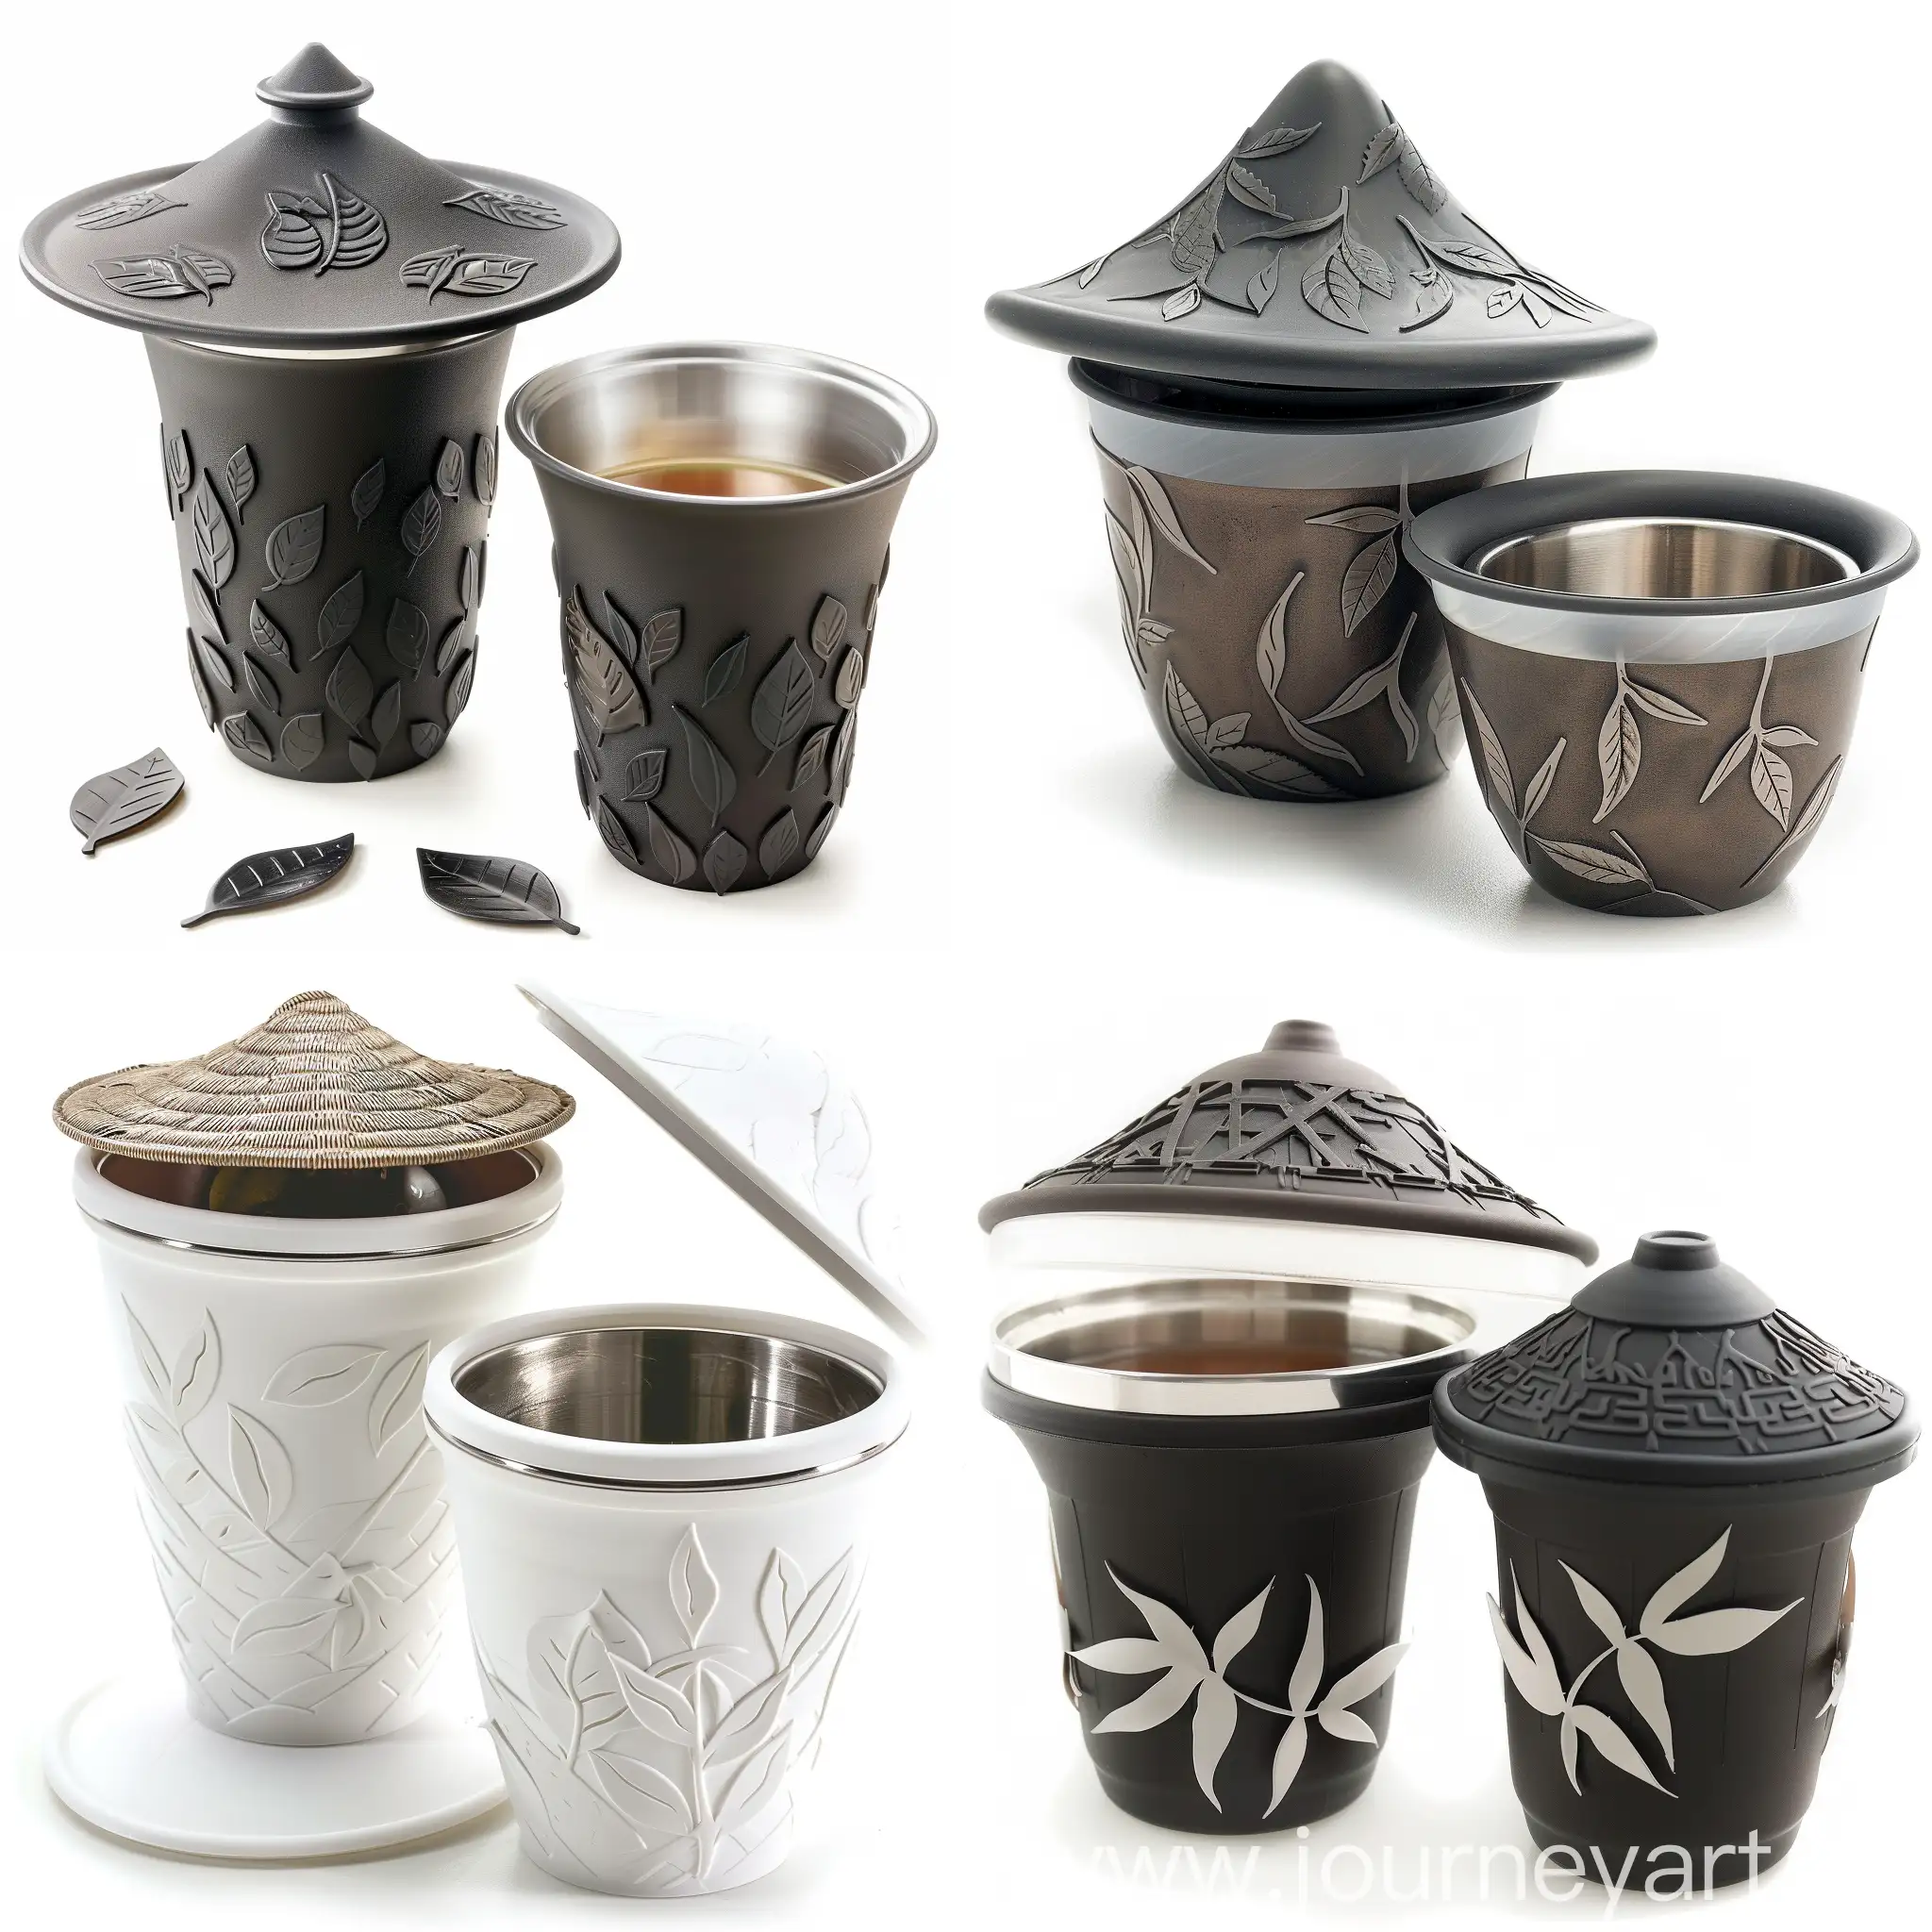 Quick Cup tea set, including two plastic cups with stainless steel inner lining, a lid shaped like a traditional Chinese hat, and the body of the Quick Cup featuring raised tea leaf patterns.